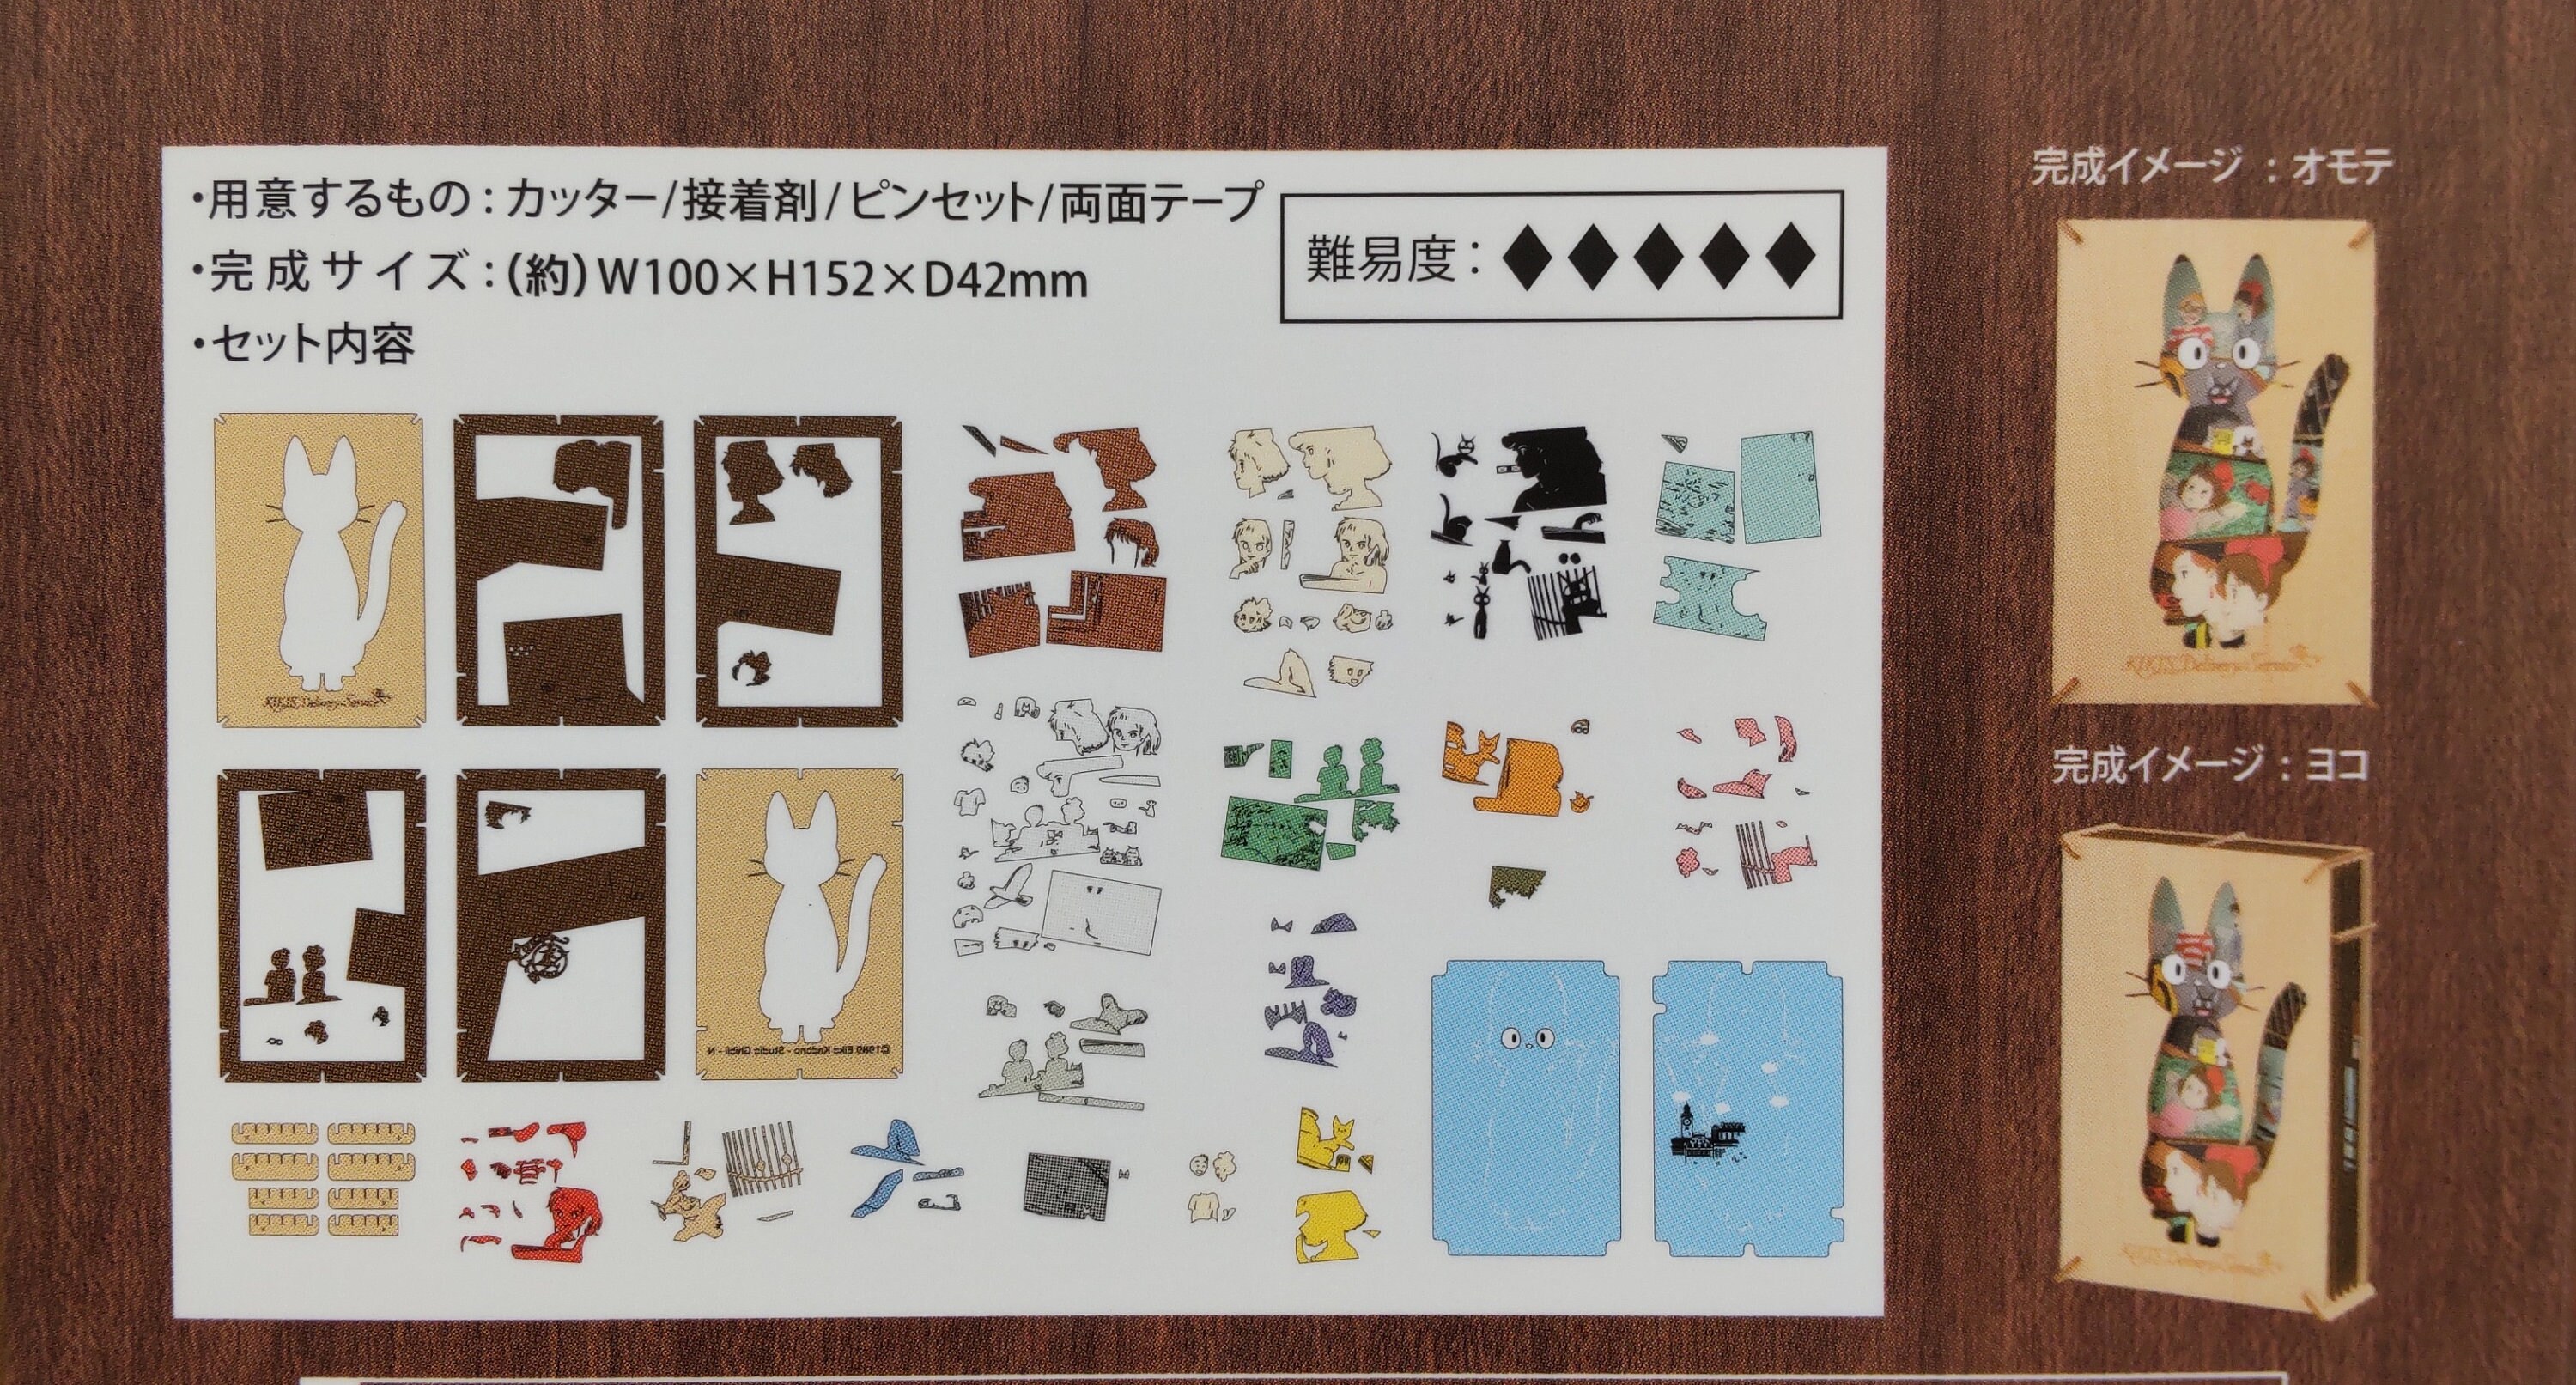 Paper Craft Kit - Paper Theater Cube - Departure - Kiki's Delivery Service  - Ghibli 2020